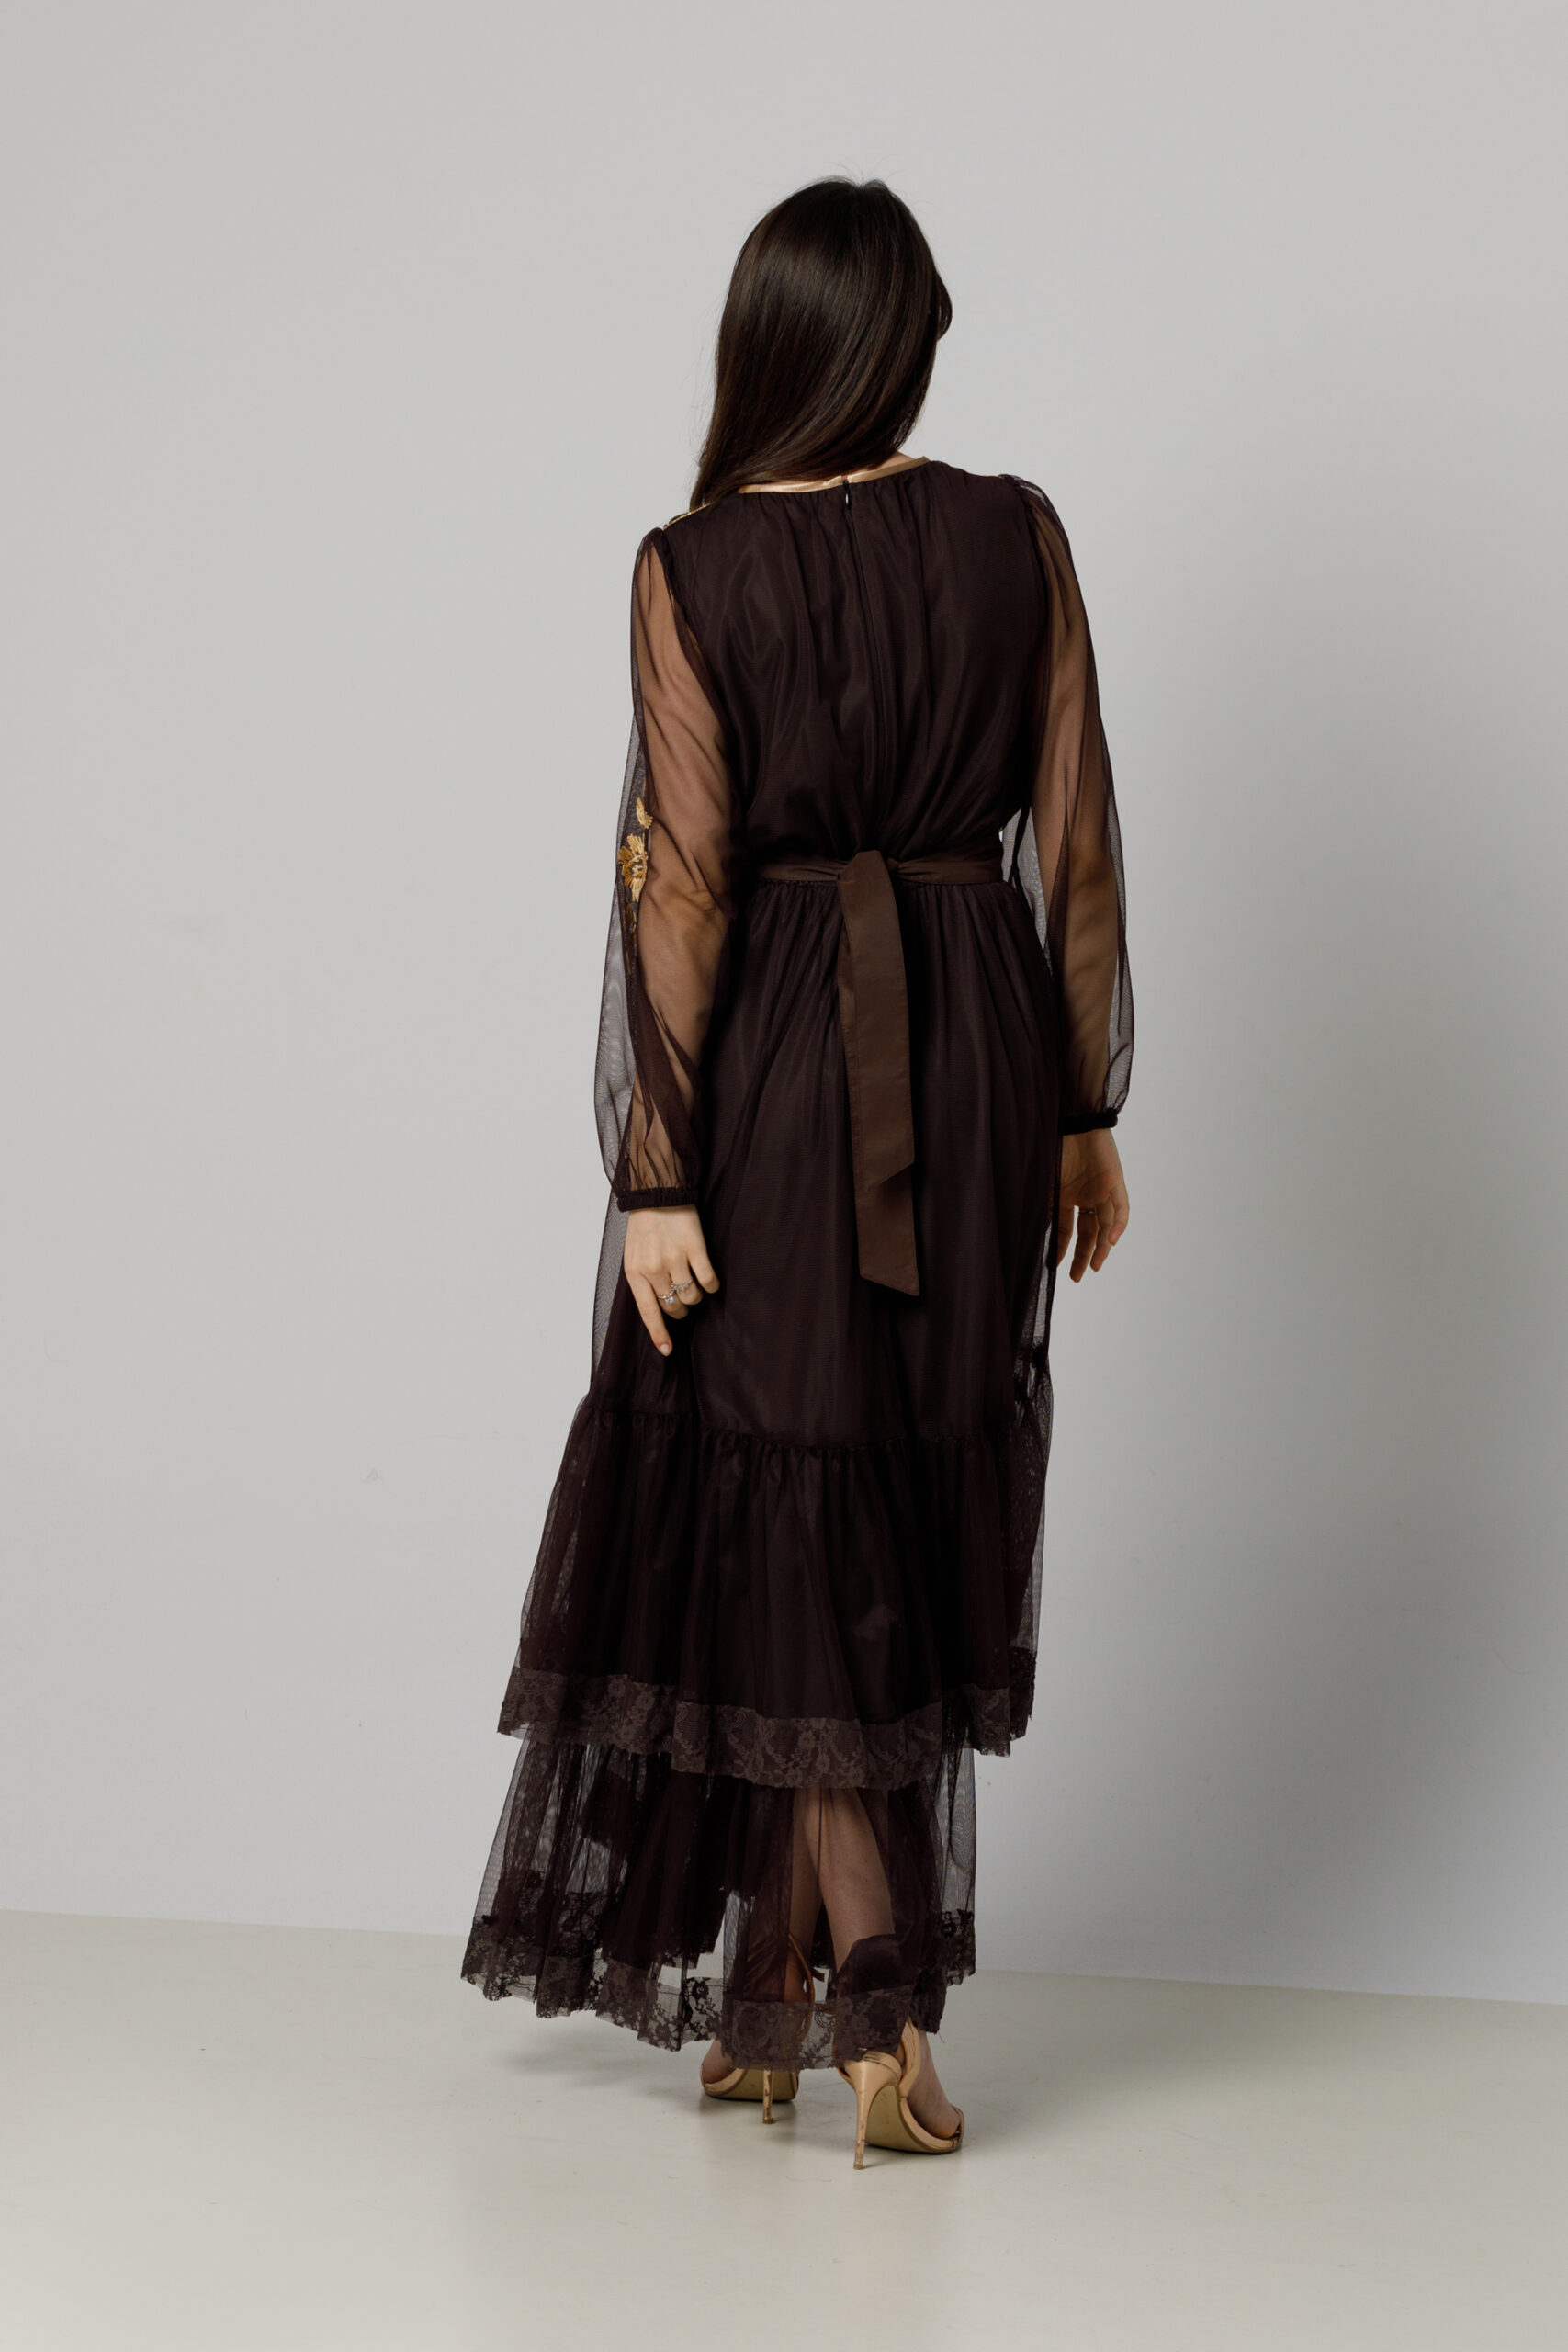 Long brown AMARIS dress with lace ruffle and floral embroidery. Natural fabrics, original design, handmade embroidery